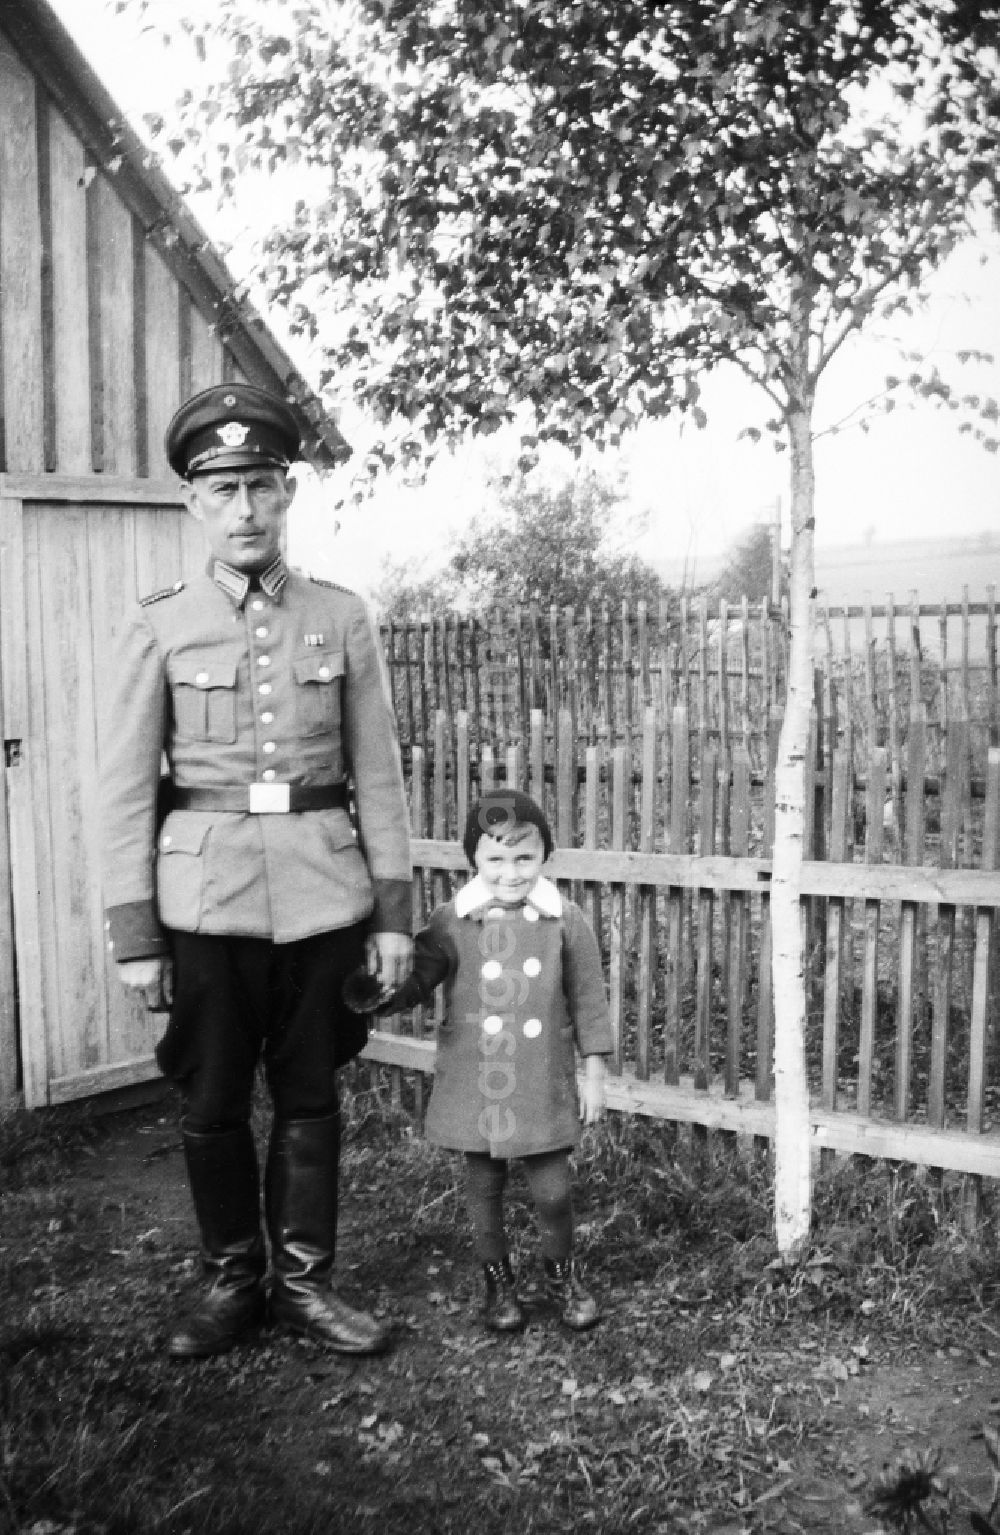 GDR image archive: Arnstadt - Father in imperial weir uniform with his daughter in Arnstadt in Thuringia in the area of the German empire, Germany